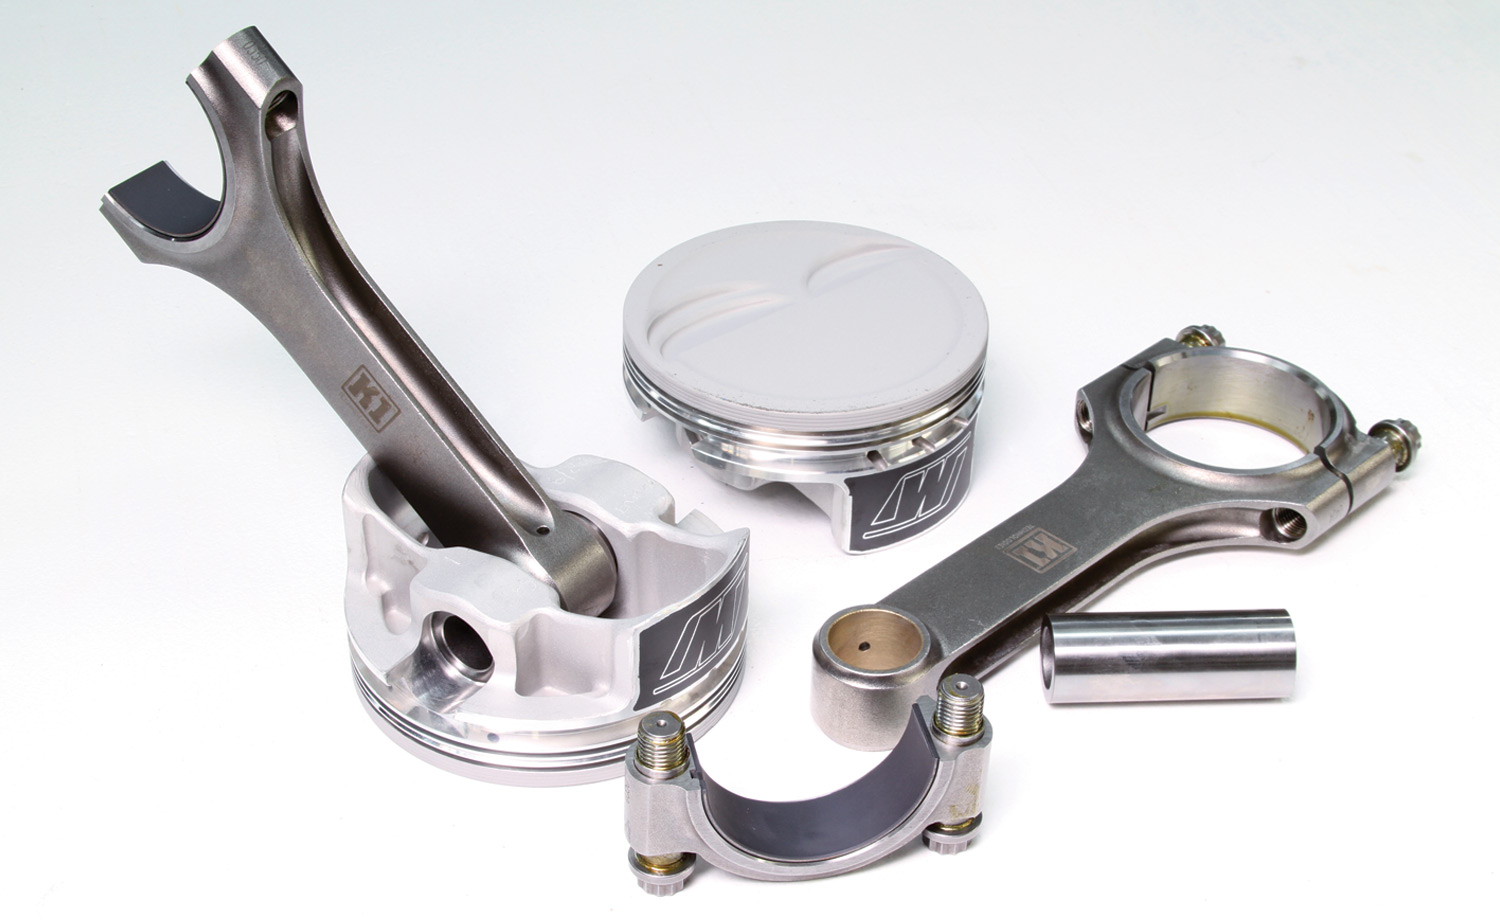 forged Wiseco pistons with friction-reducing skirt coatings and K1 forged I-beam rods